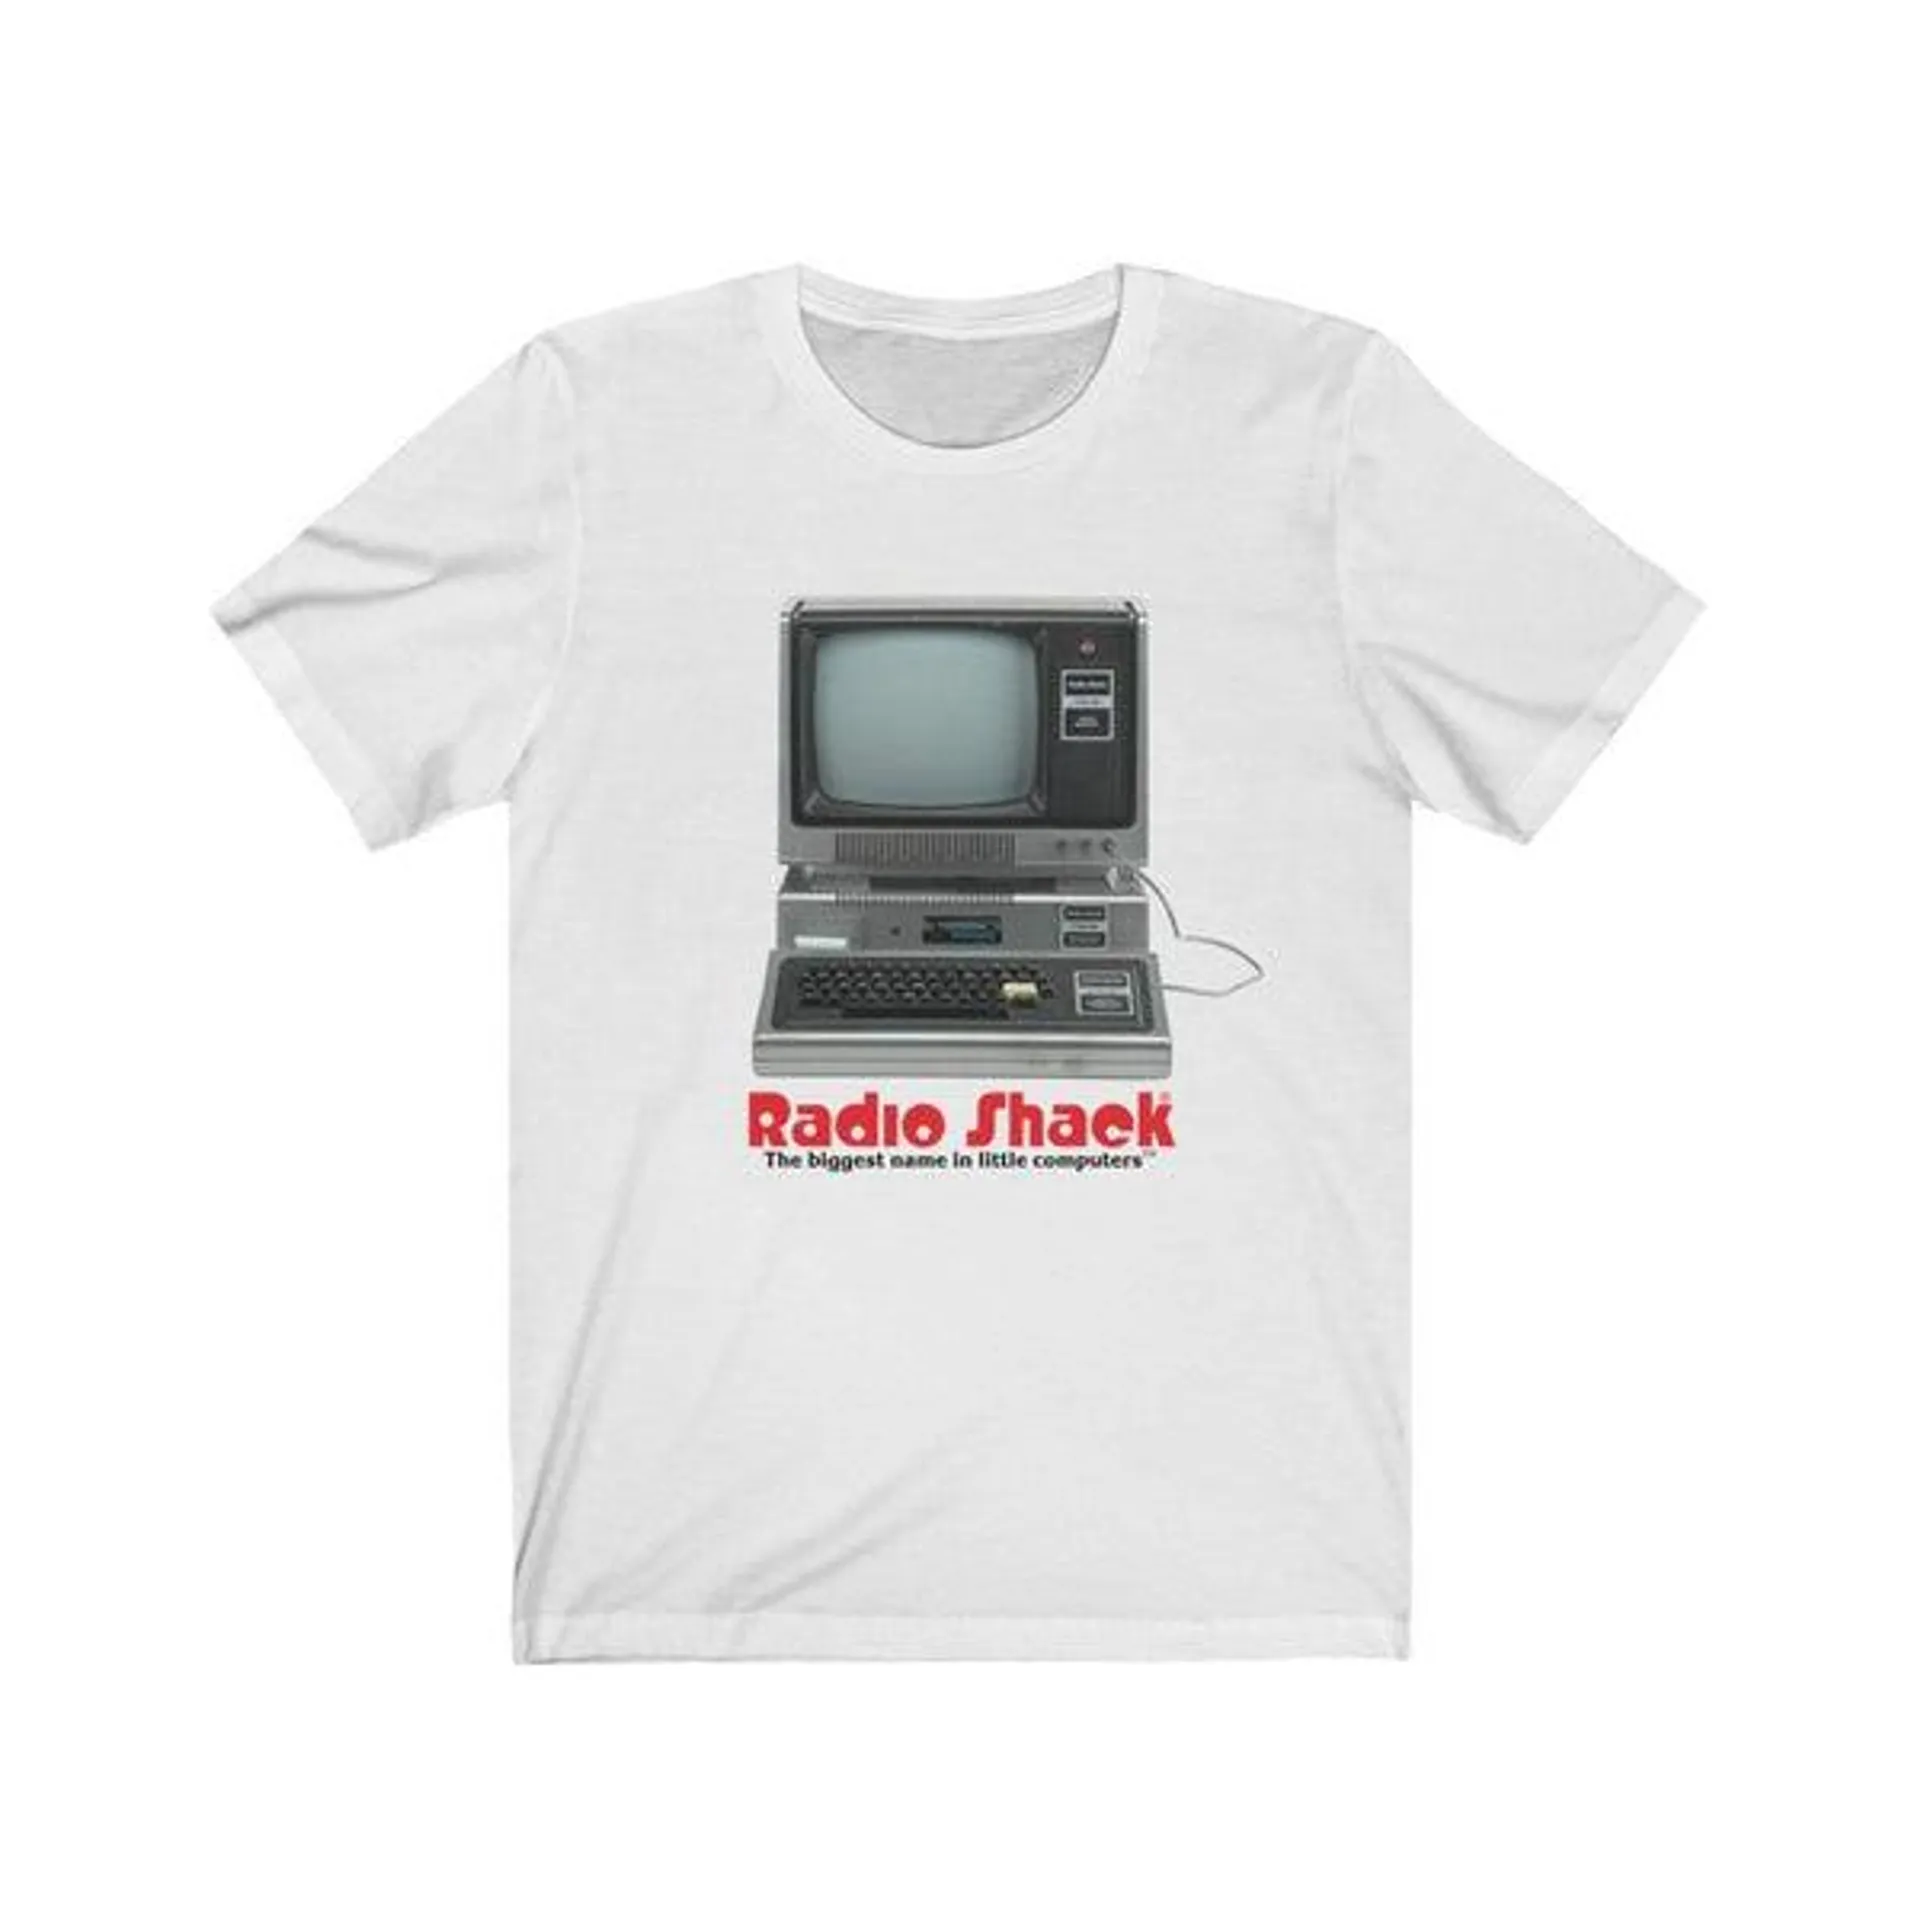 Retro RadioShack Tandy TRS-80 "Biggest Name In Little Computers" T-Shirt